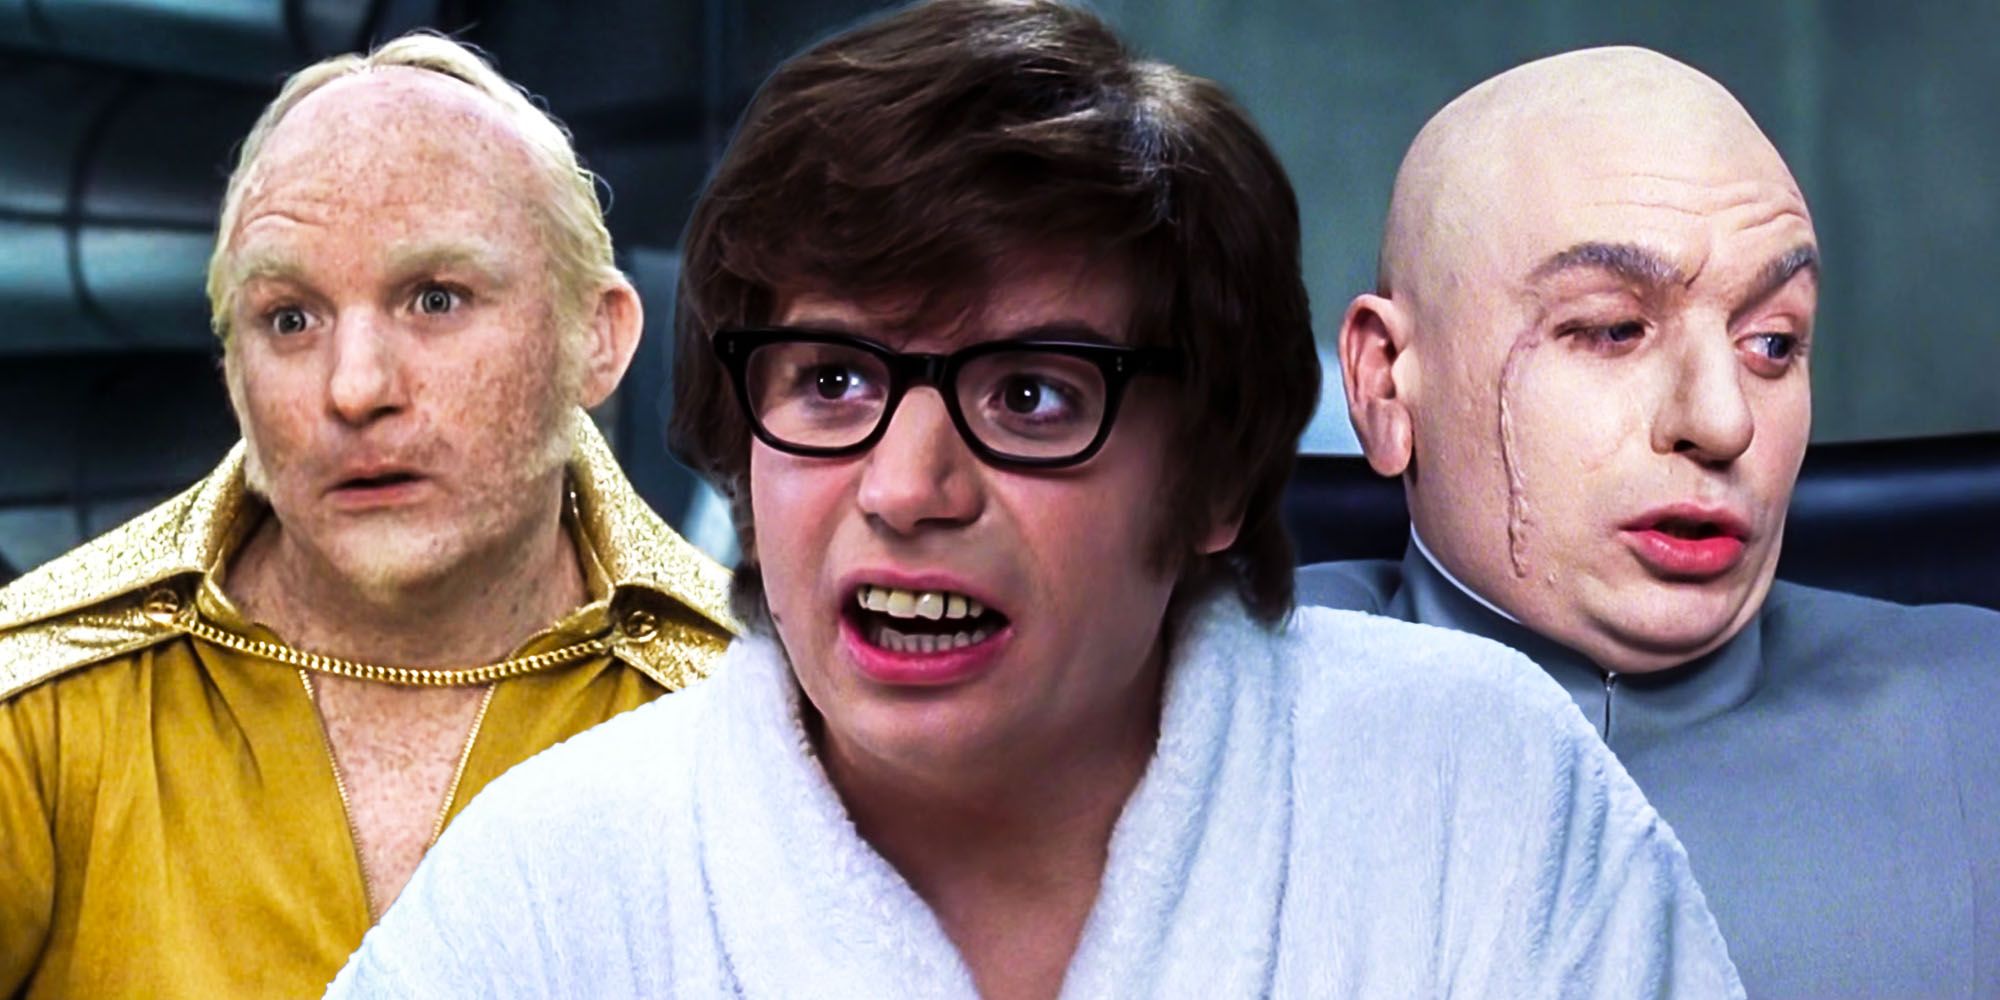 Every character mike myers plays in the austin powers movies dr evil goldmember